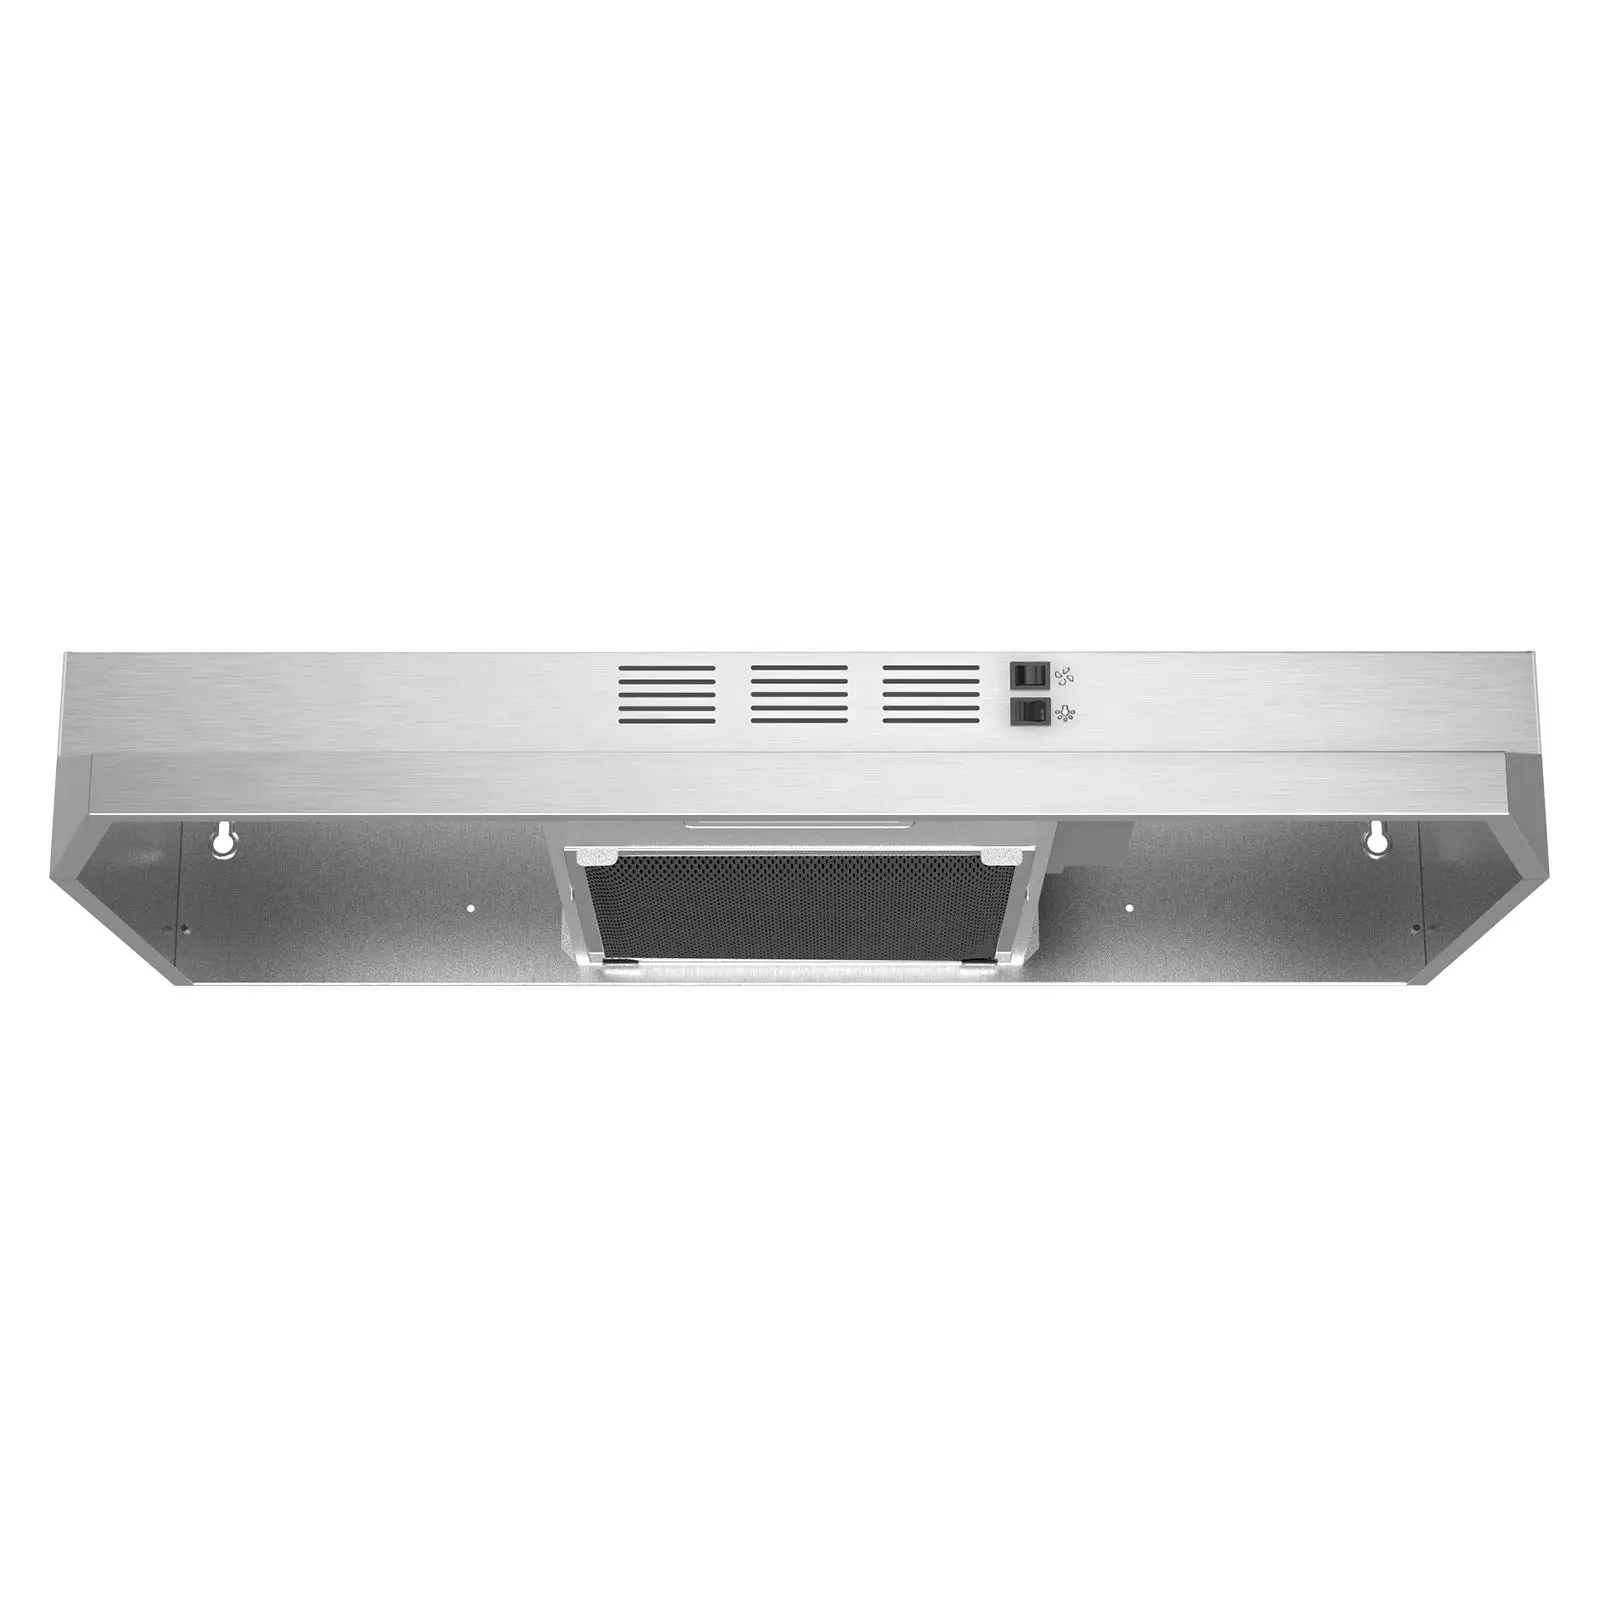 Tieasy 30 inch 280CFM Ductless Ducted Convertible Gesture Touch Sensing Control 9-Speed Fan Range Hood for Kitchen ZMS-3976